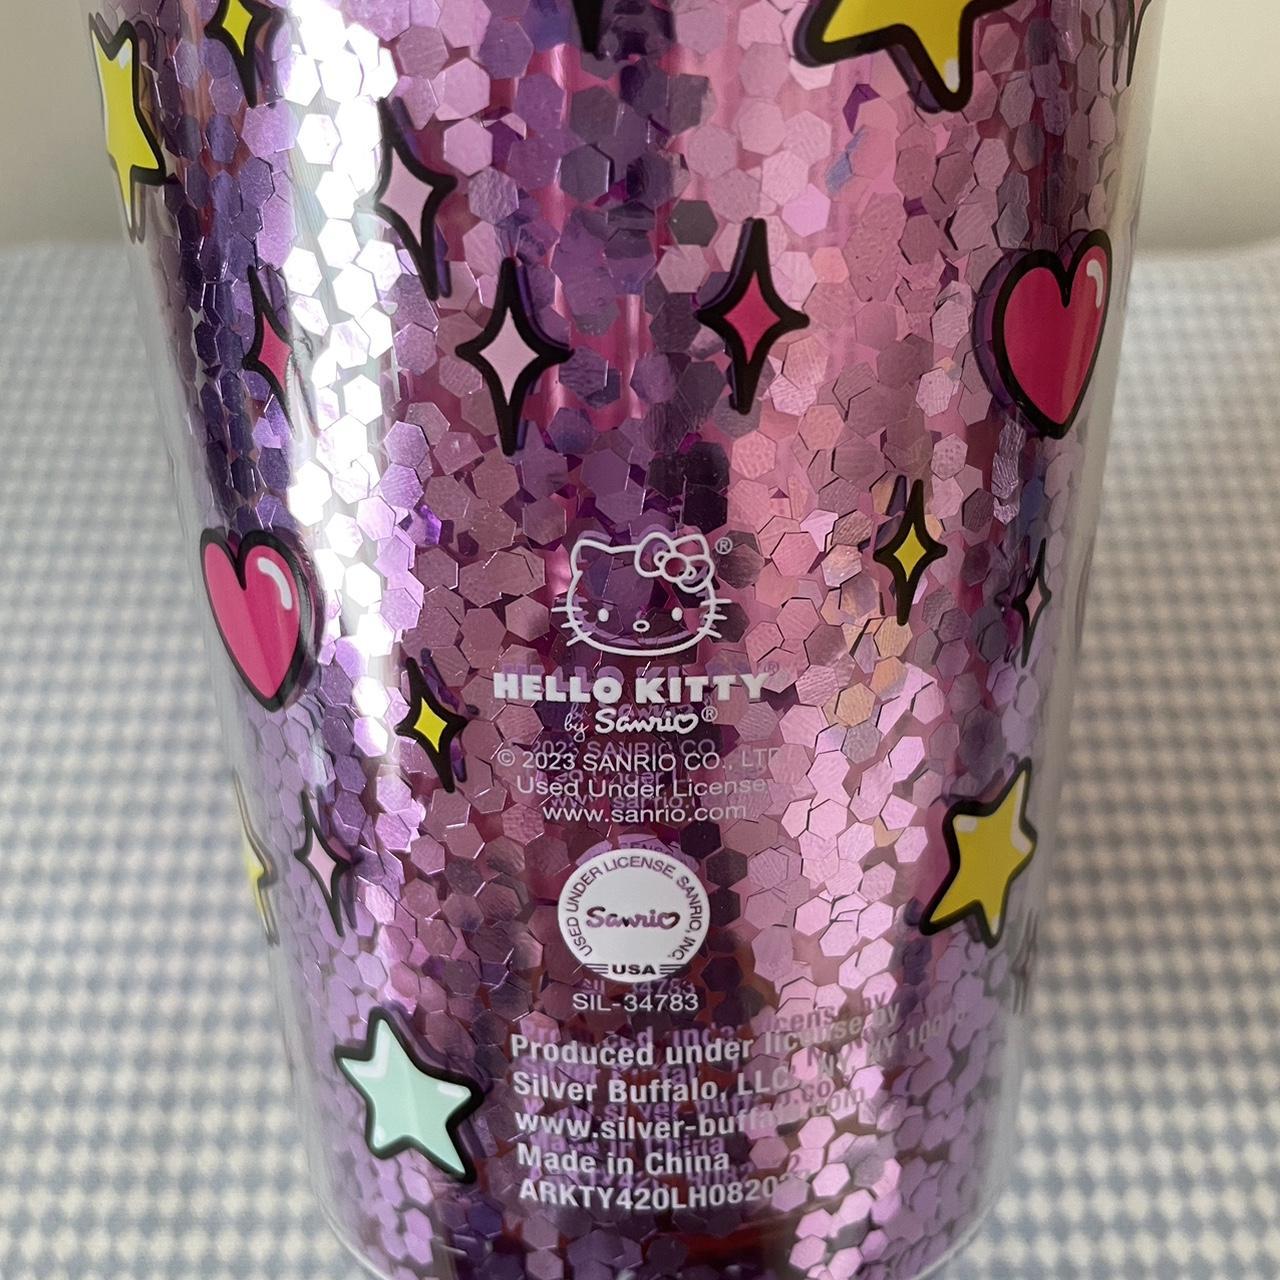 Sanrio Hello Kitty Pink Plastic Tumbler With Lid and Straw | Holds 32 Ounces